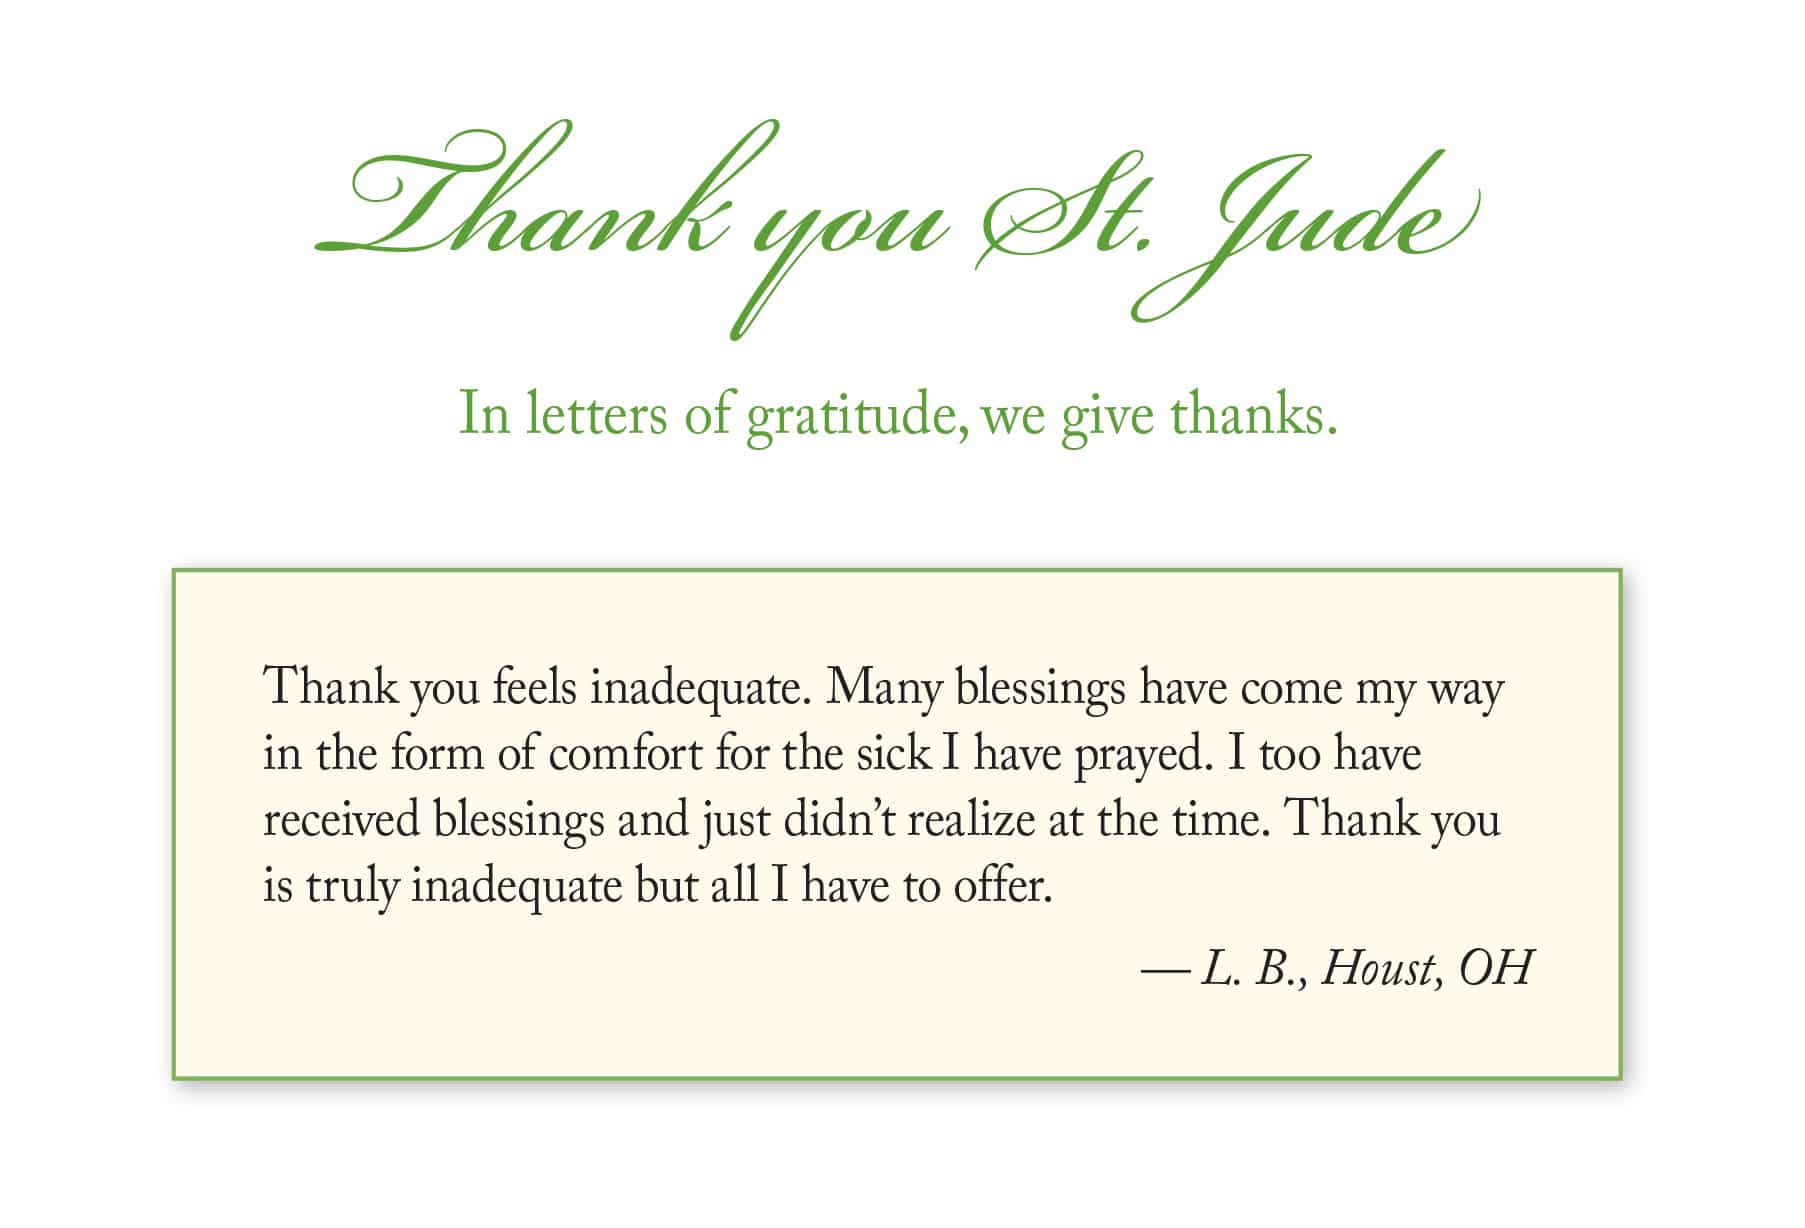 Letters of Gratitude January 2020